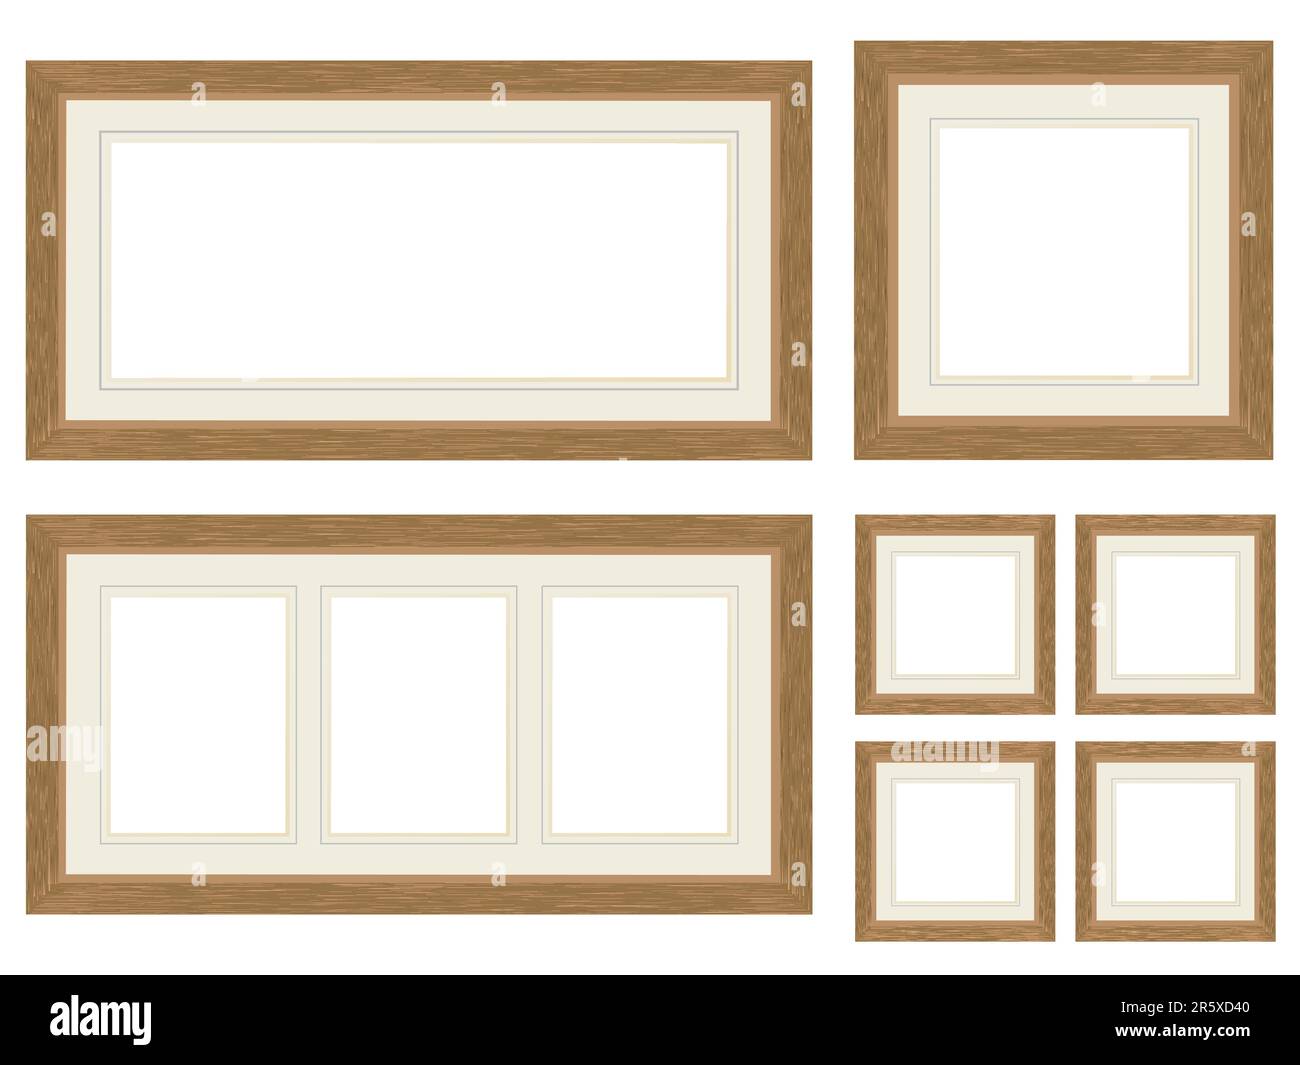 Set of wood effect picure frames Stock Vector